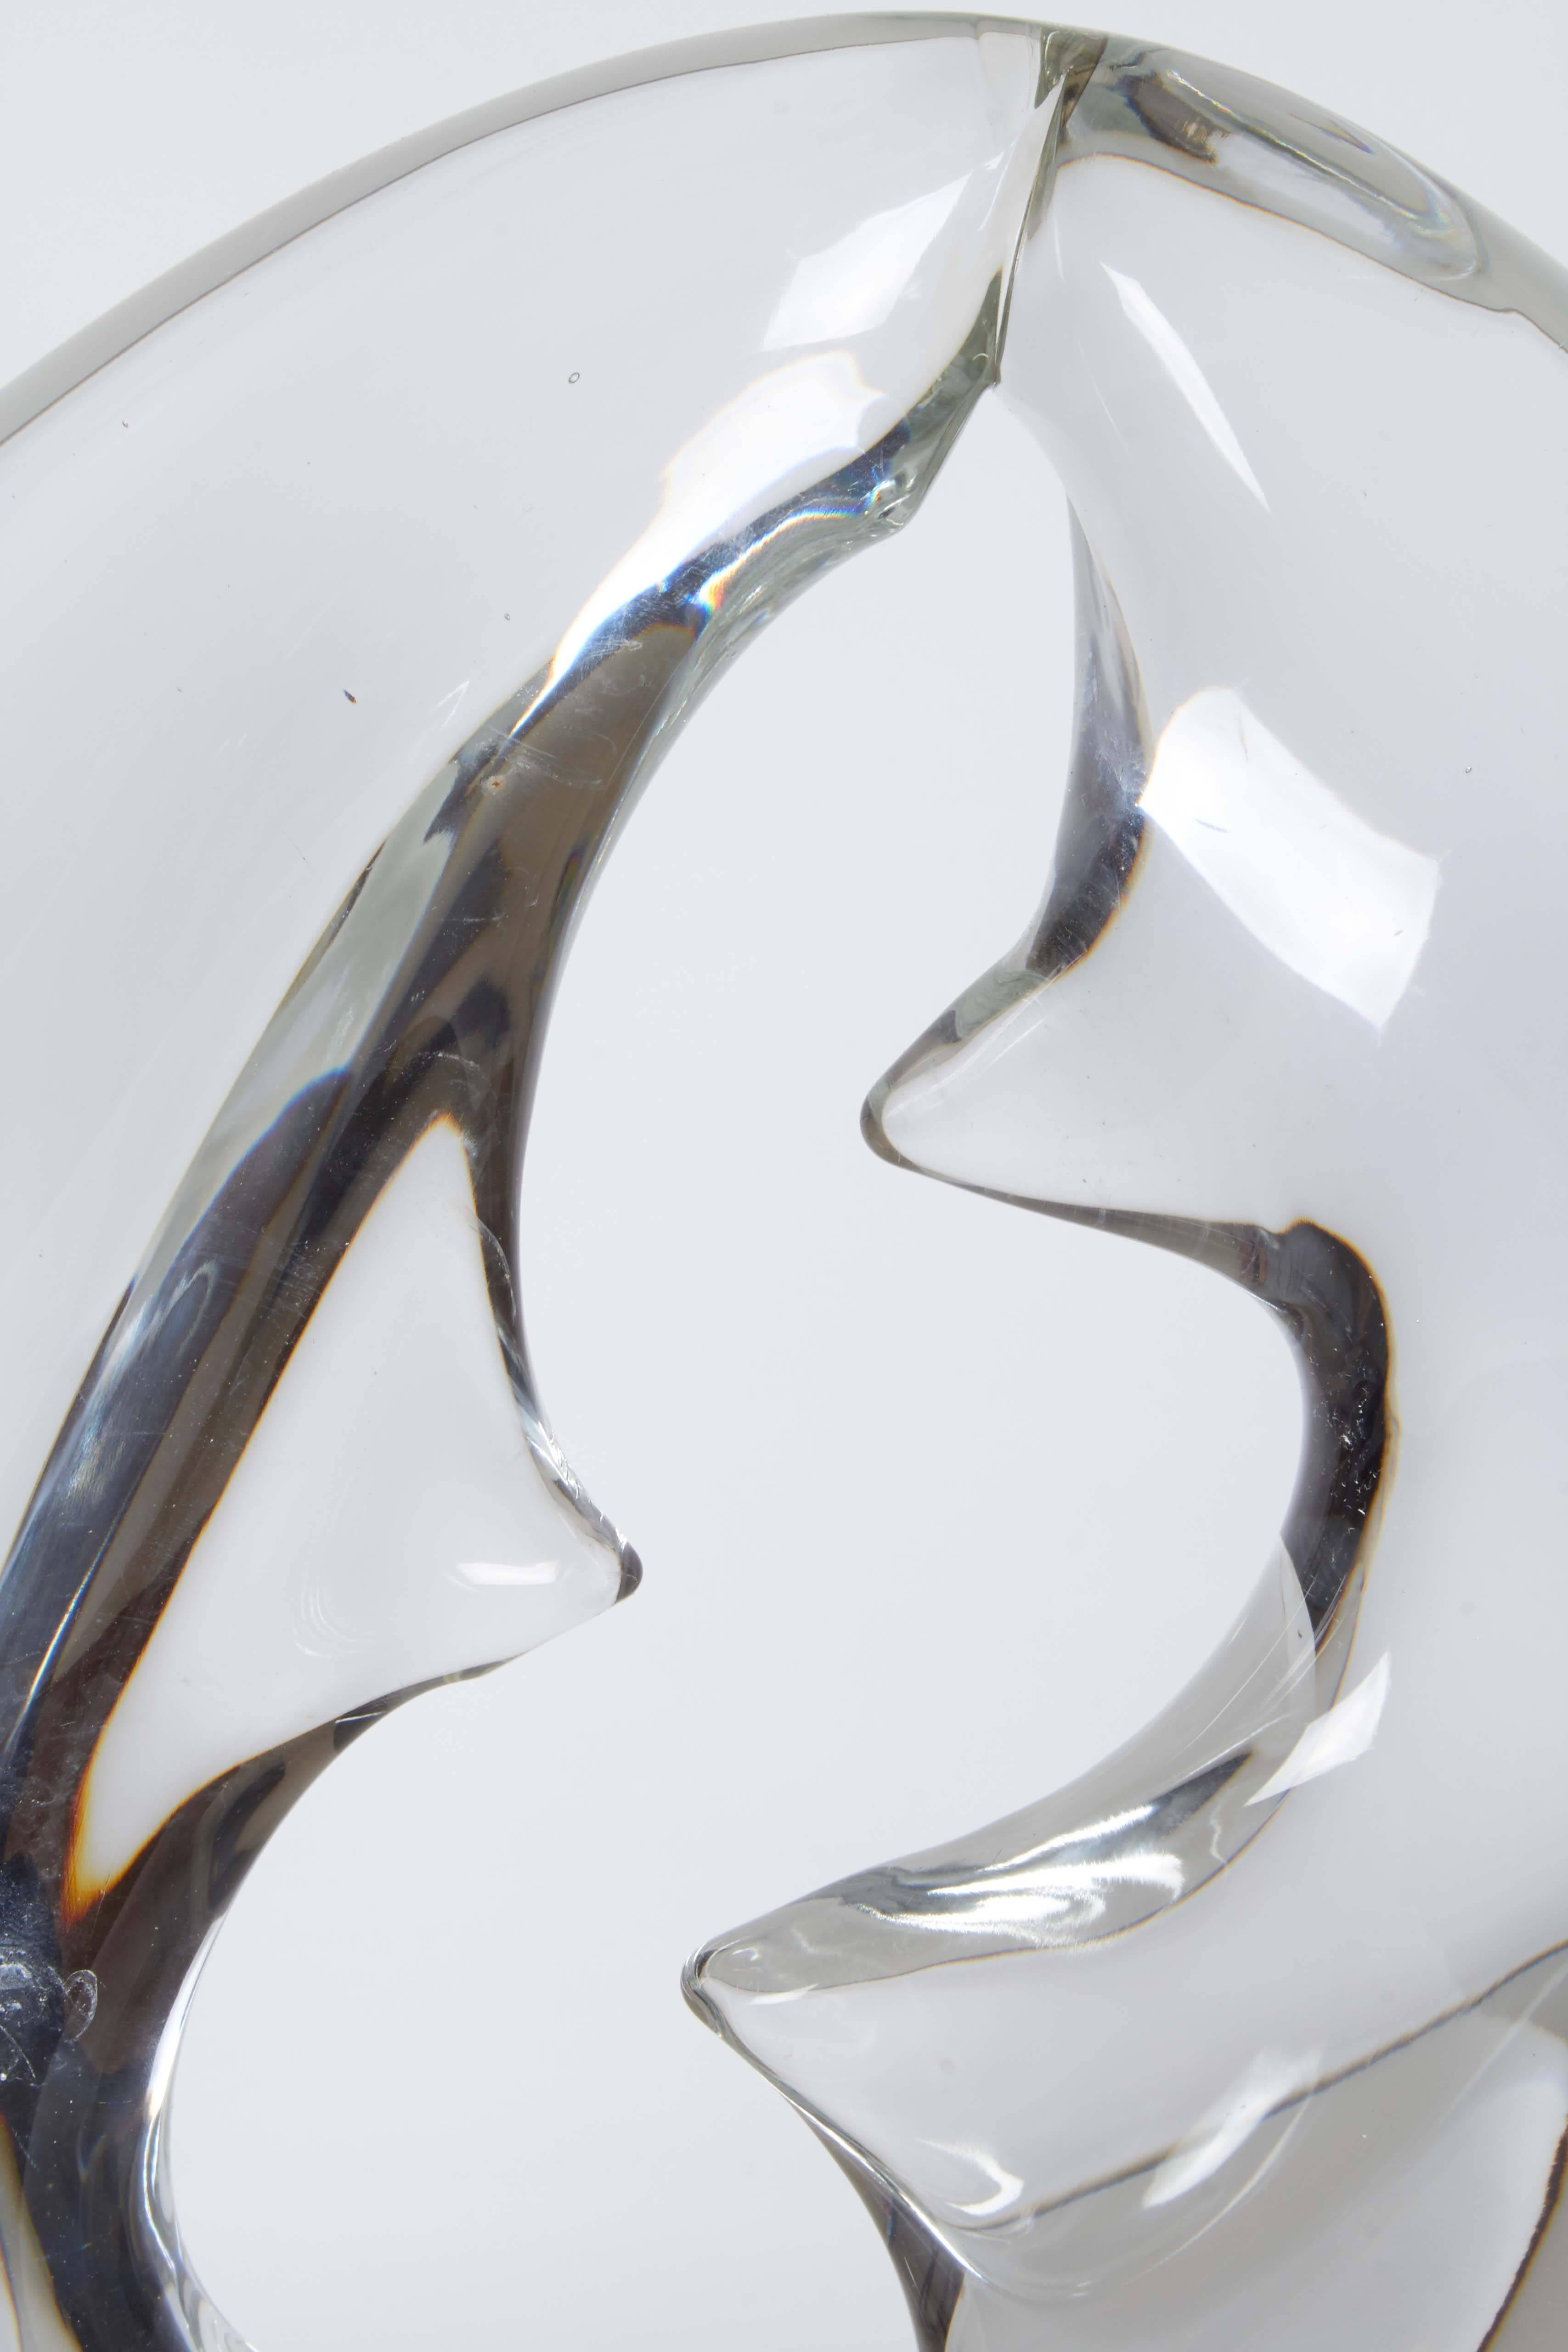 An Italian abstract sculpture in Murano glass, produced circa 1960s by Livio Seguso, depicting two crescent shapes, joined as a ring, on cylindrical frosted base. Markings include signature [L. Seguso] to the underside of the base. Excellent vintage